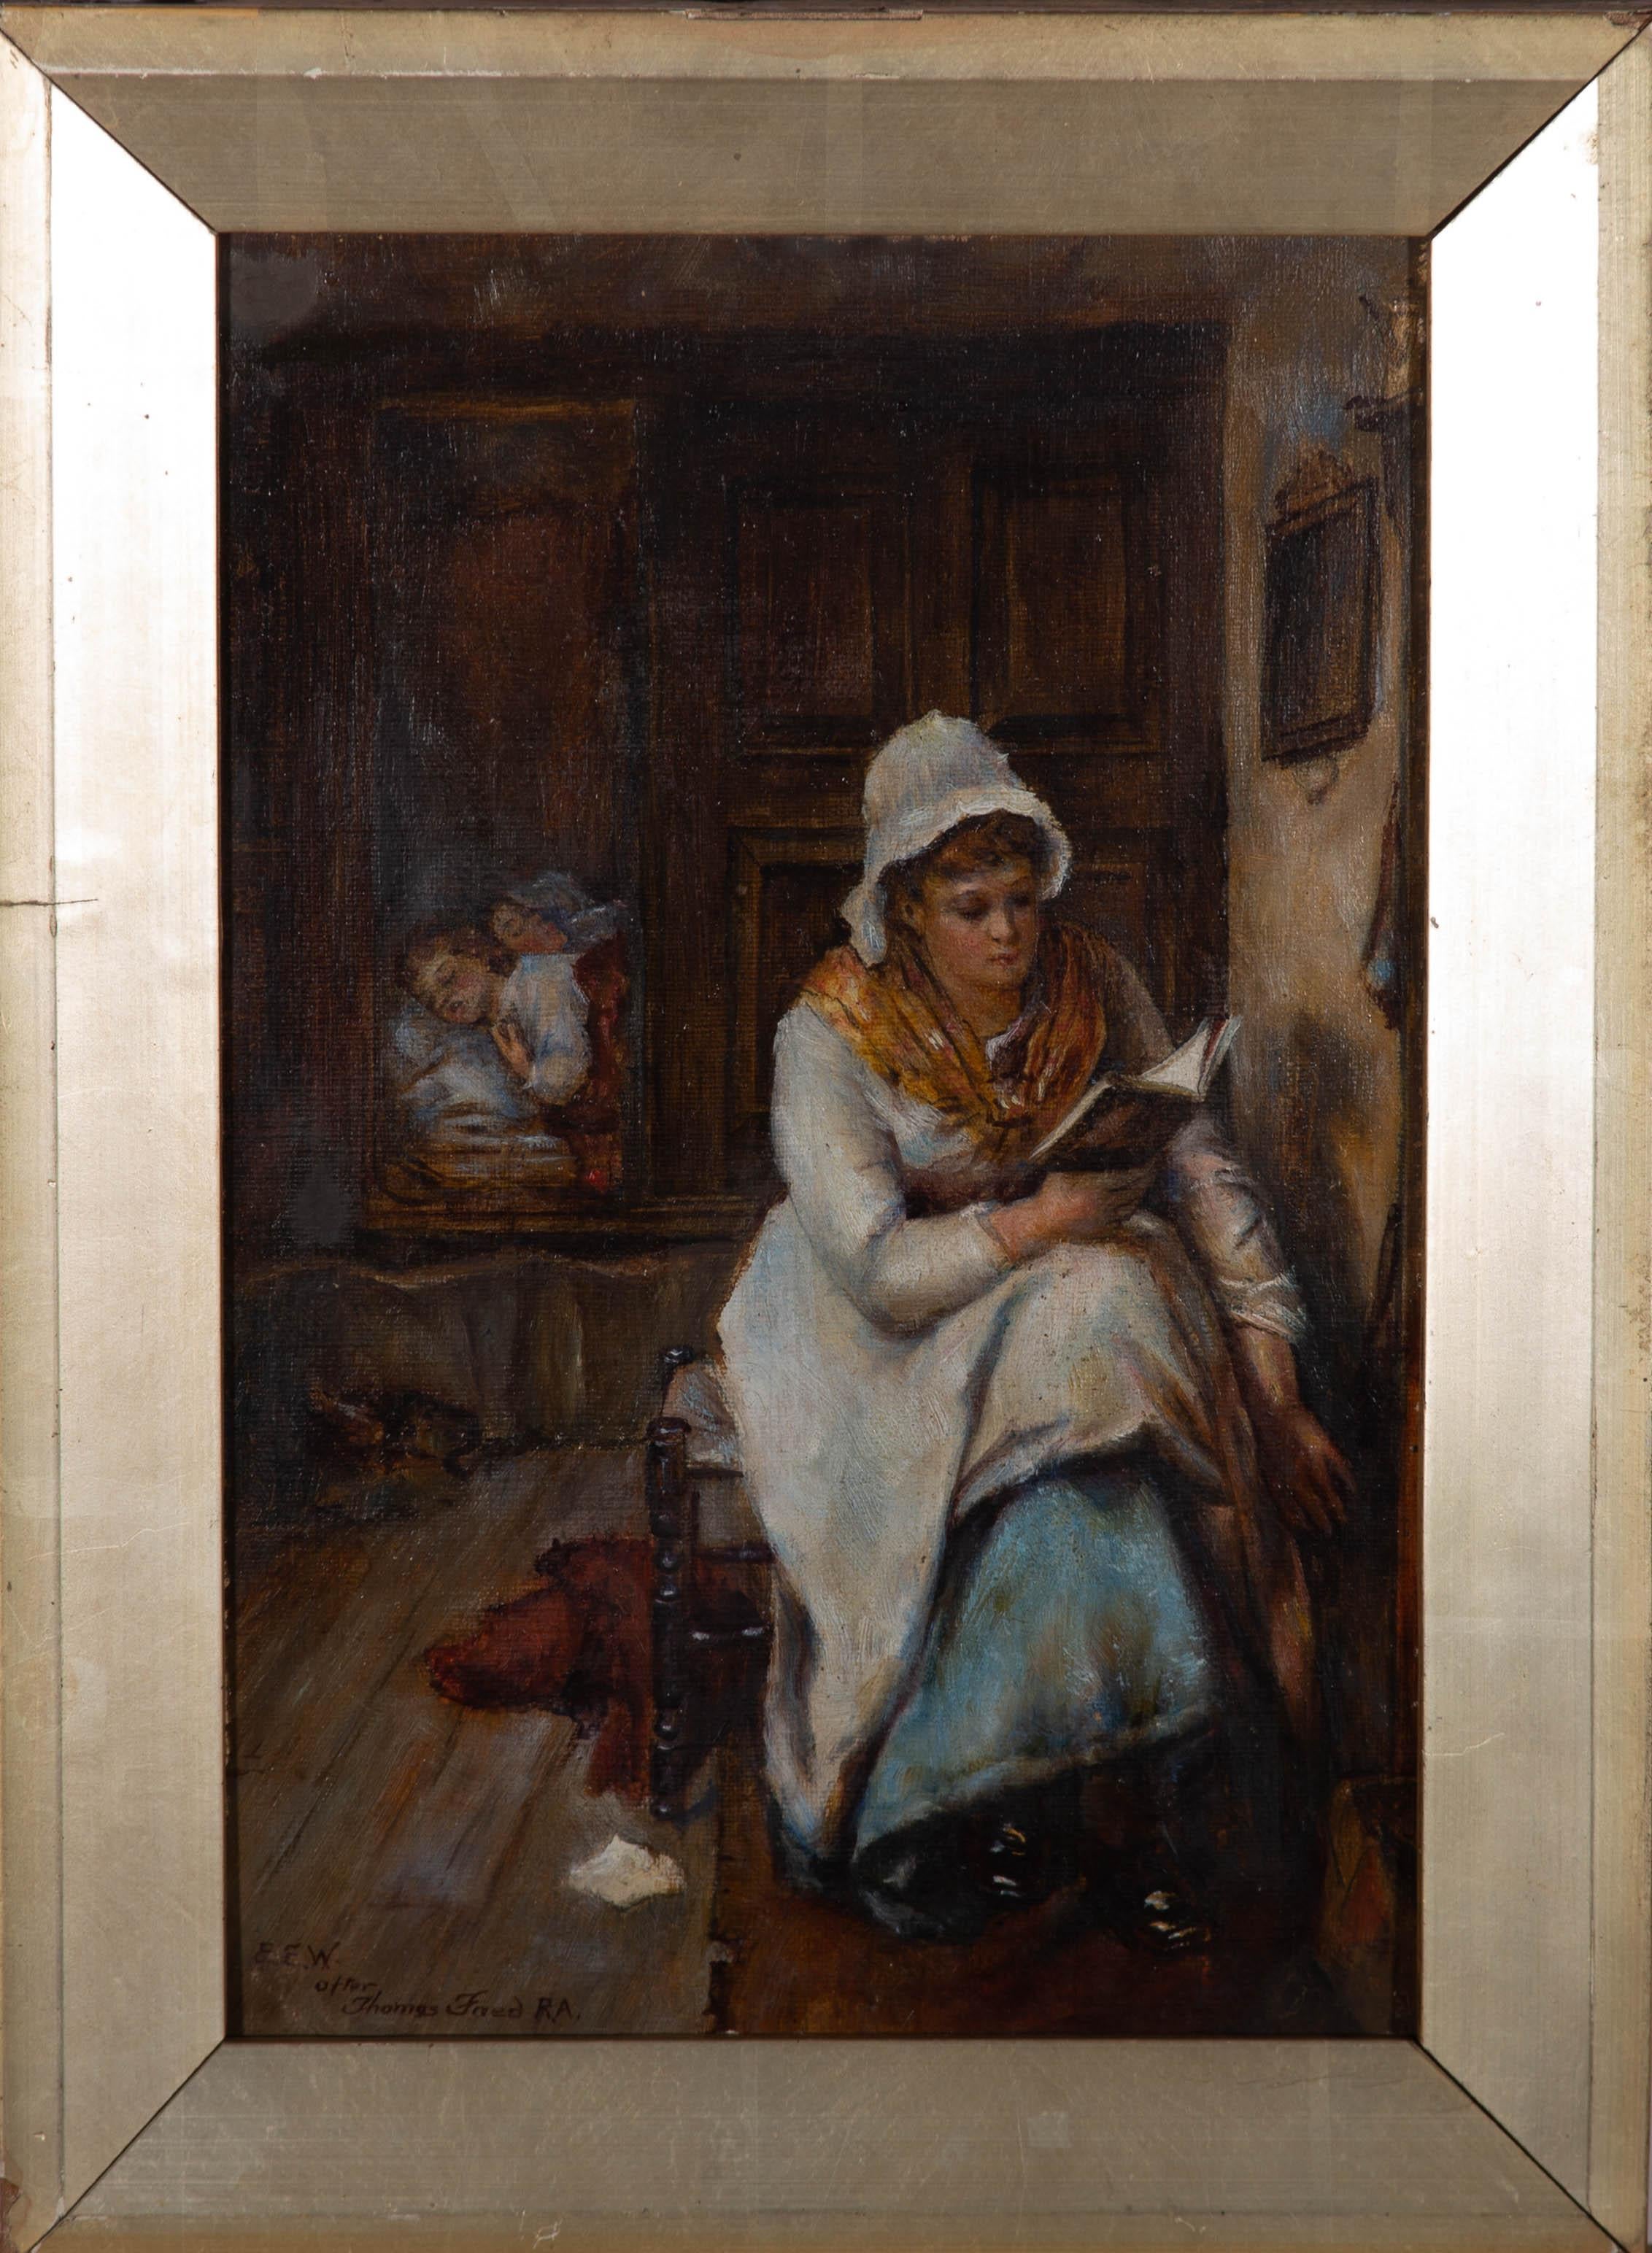 An accomplished early-20th century copy after Thomas Faed RSA's (1826-1900) 'When the Children are Asleep' (1885) that hangs in the Walker Art Gallery, Liverpool. Presented in a distressed gilt-effect slip. Signed to the lower-left edge. Inscribed